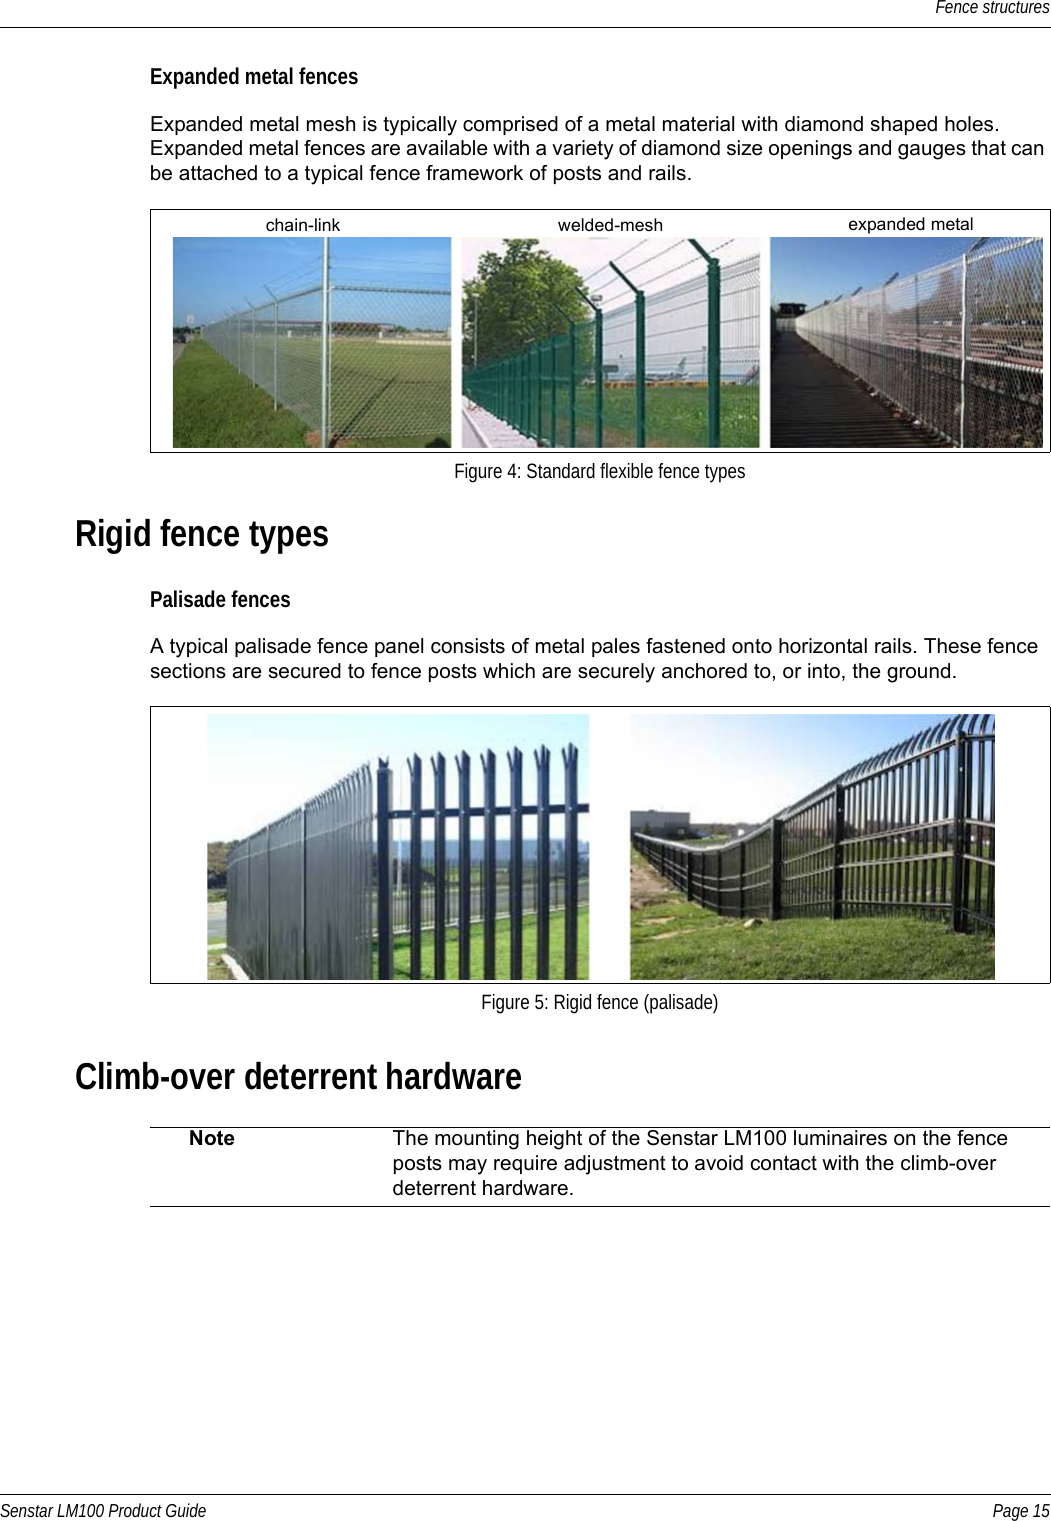 Fence structuresSenstar LM100 Product Guide Page 15Expanded metal fencesExpanded metal mesh is typically comprised of a metal material with diamond shaped holes. Expanded metal fences are available with a variety of diamond size openings and gauges that can be attached to a typical fence framework of posts and rails. Rigid fence typesPalisade fencesA typical palisade fence panel consists of metal pales fastened onto horizontal rails. These fence sections are secured to fence posts which are securely anchored to, or into, the ground.Climb-over deterrent hardware  Figure 4: Standard flexible fence typesFigure 5: Rigid fence (palisade)Note The mounting height of the Senstar LM100 luminaires on the fence posts may require adjustment to avoid contact with the climb-over deterrent hardware. chain-link welded-mesh expanded metal